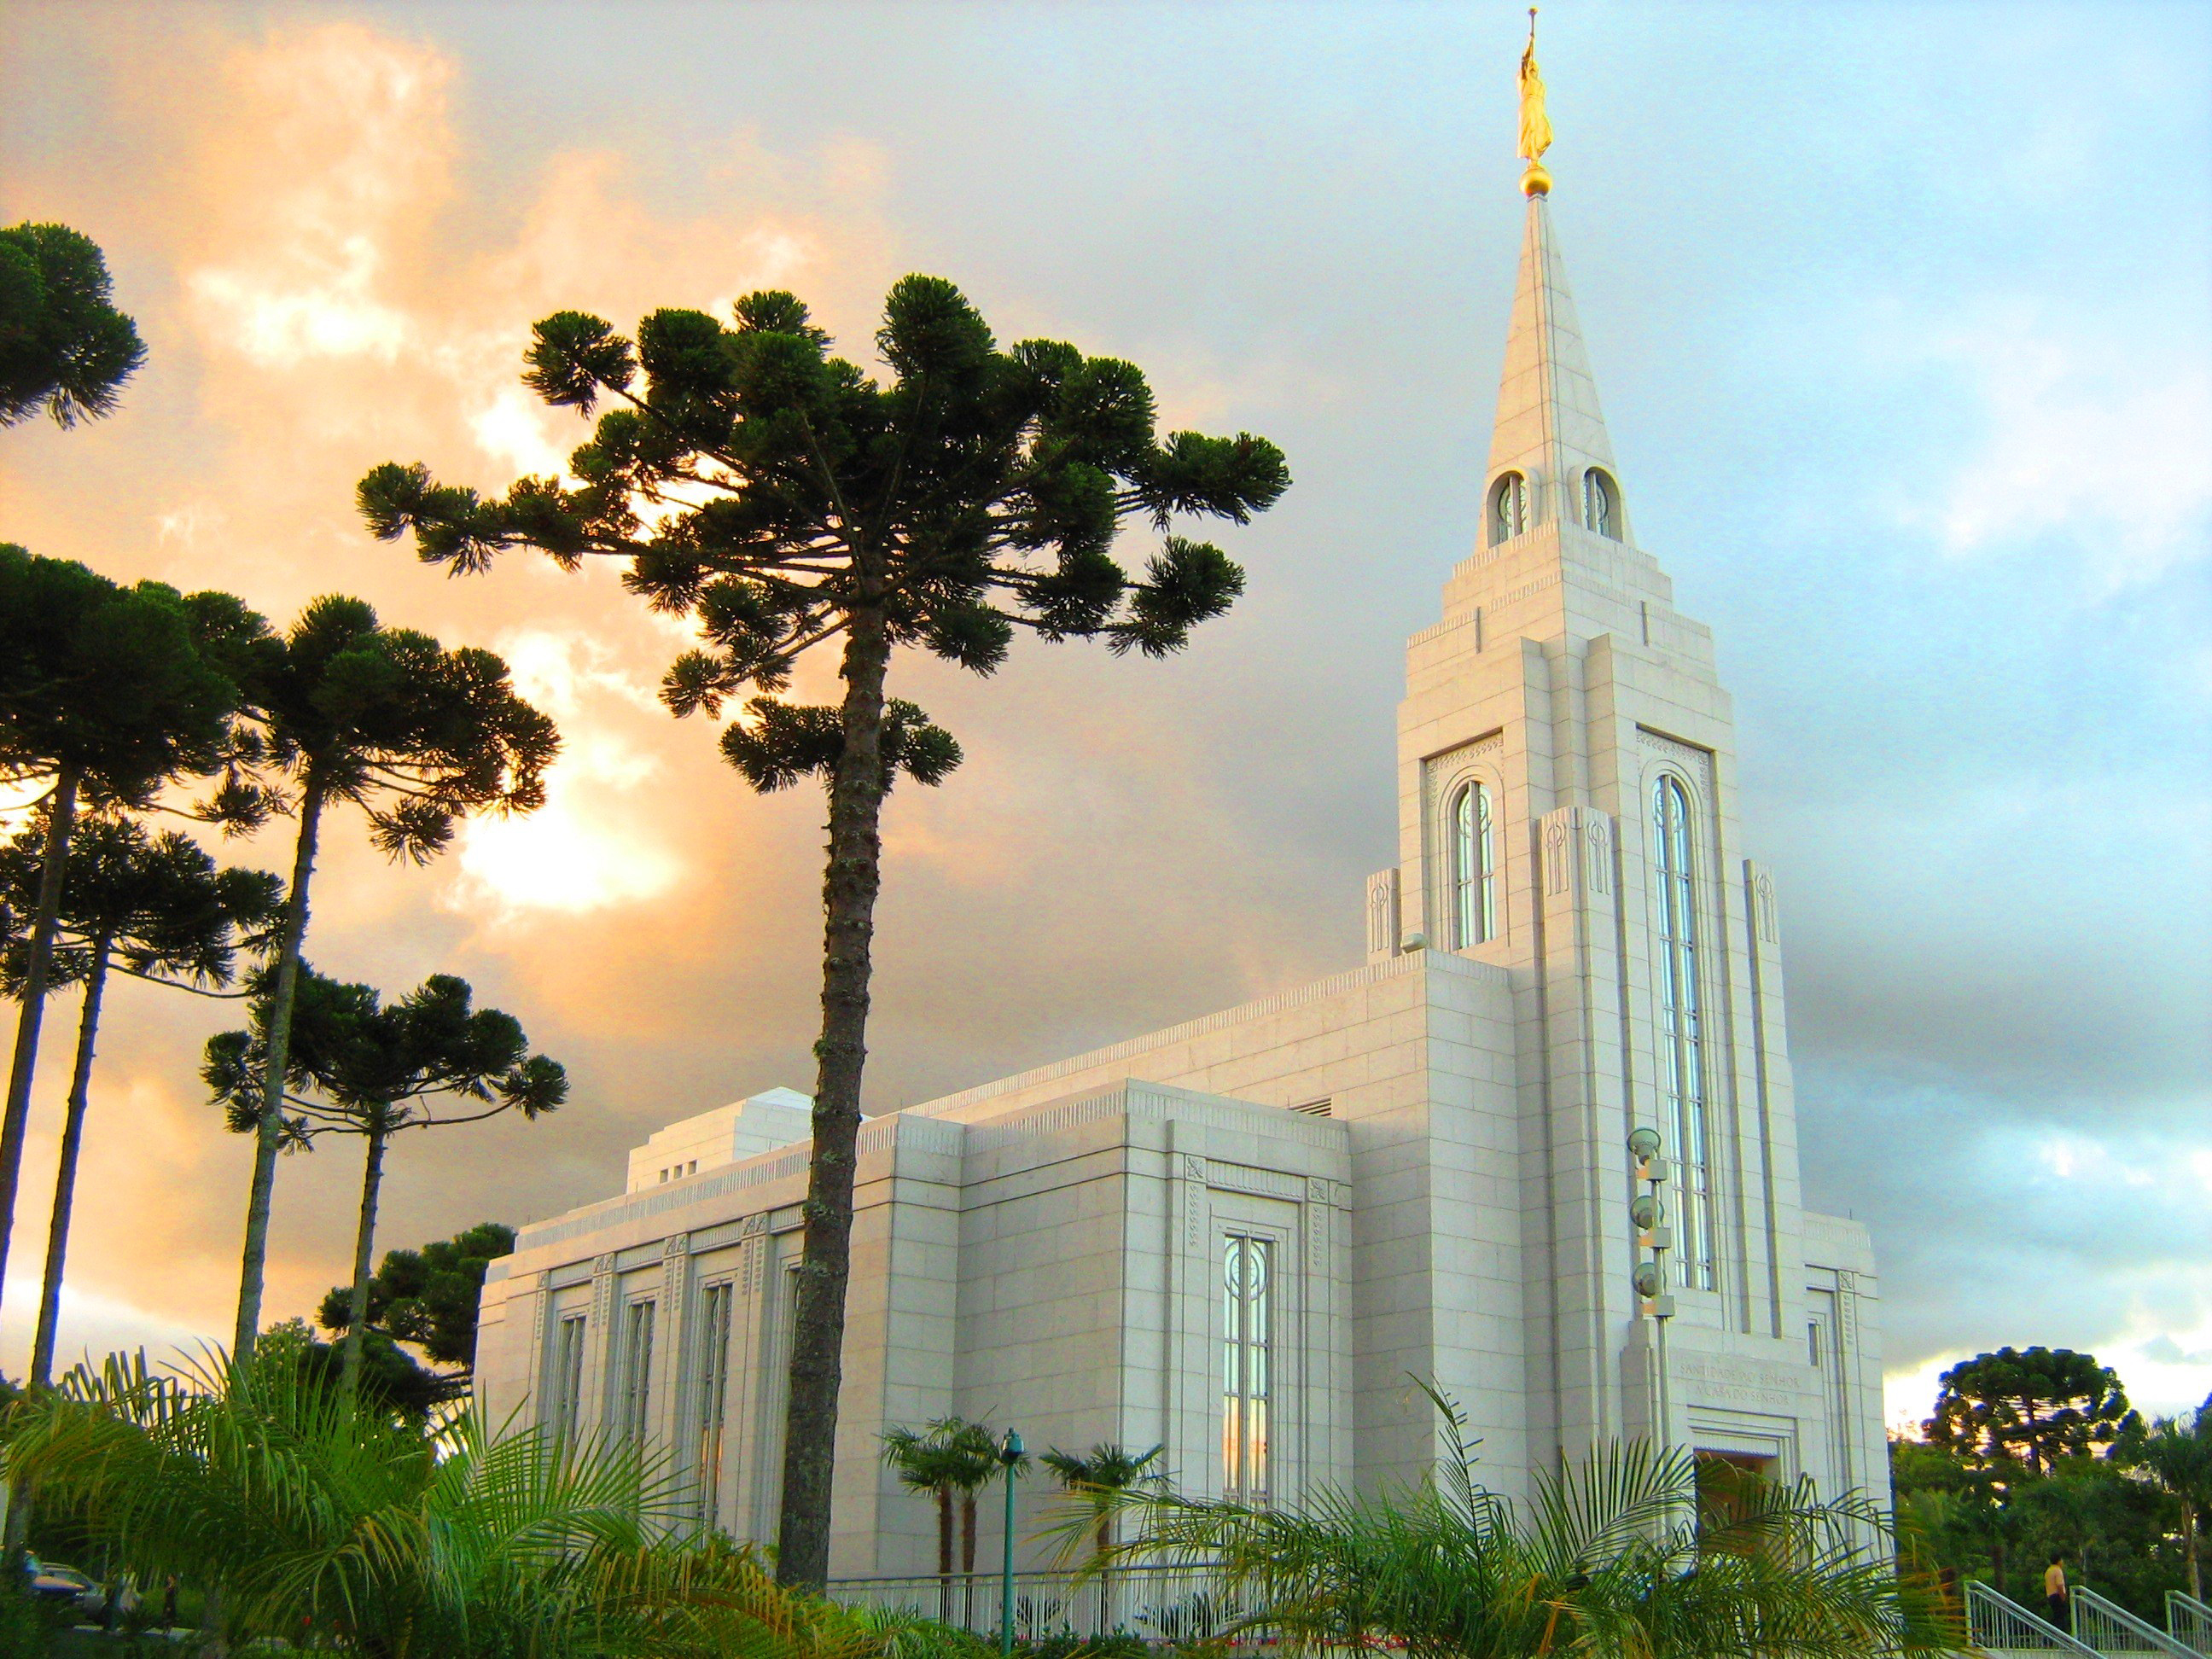 The Curitiba Brazil Temple, a white building topped by a golden statue of an angel blowing a horn.